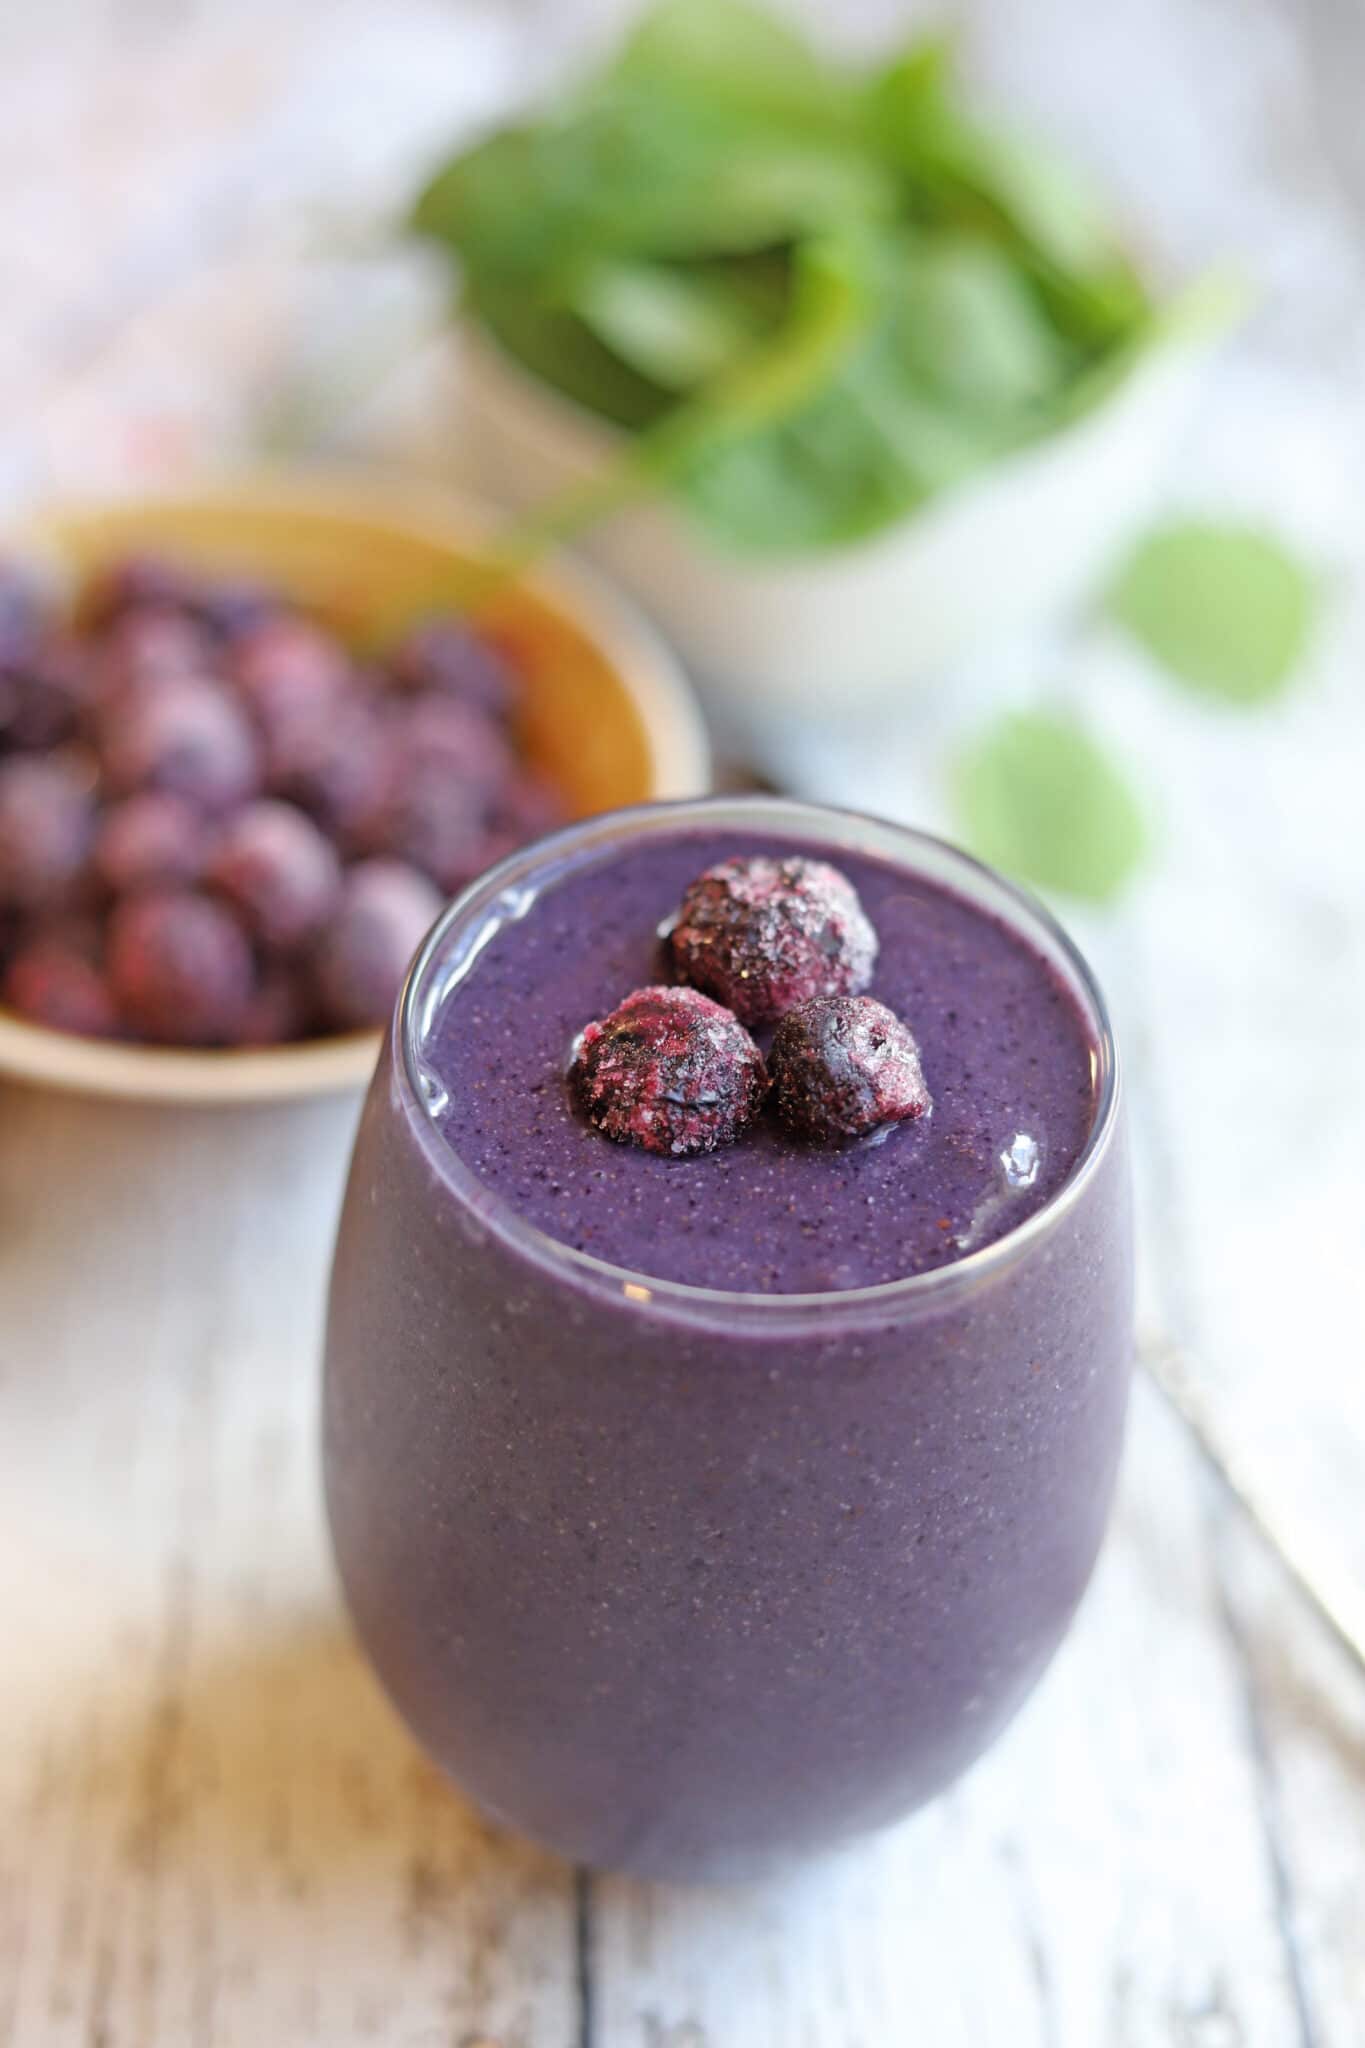 Frozen blueberries on top of a smoothie.